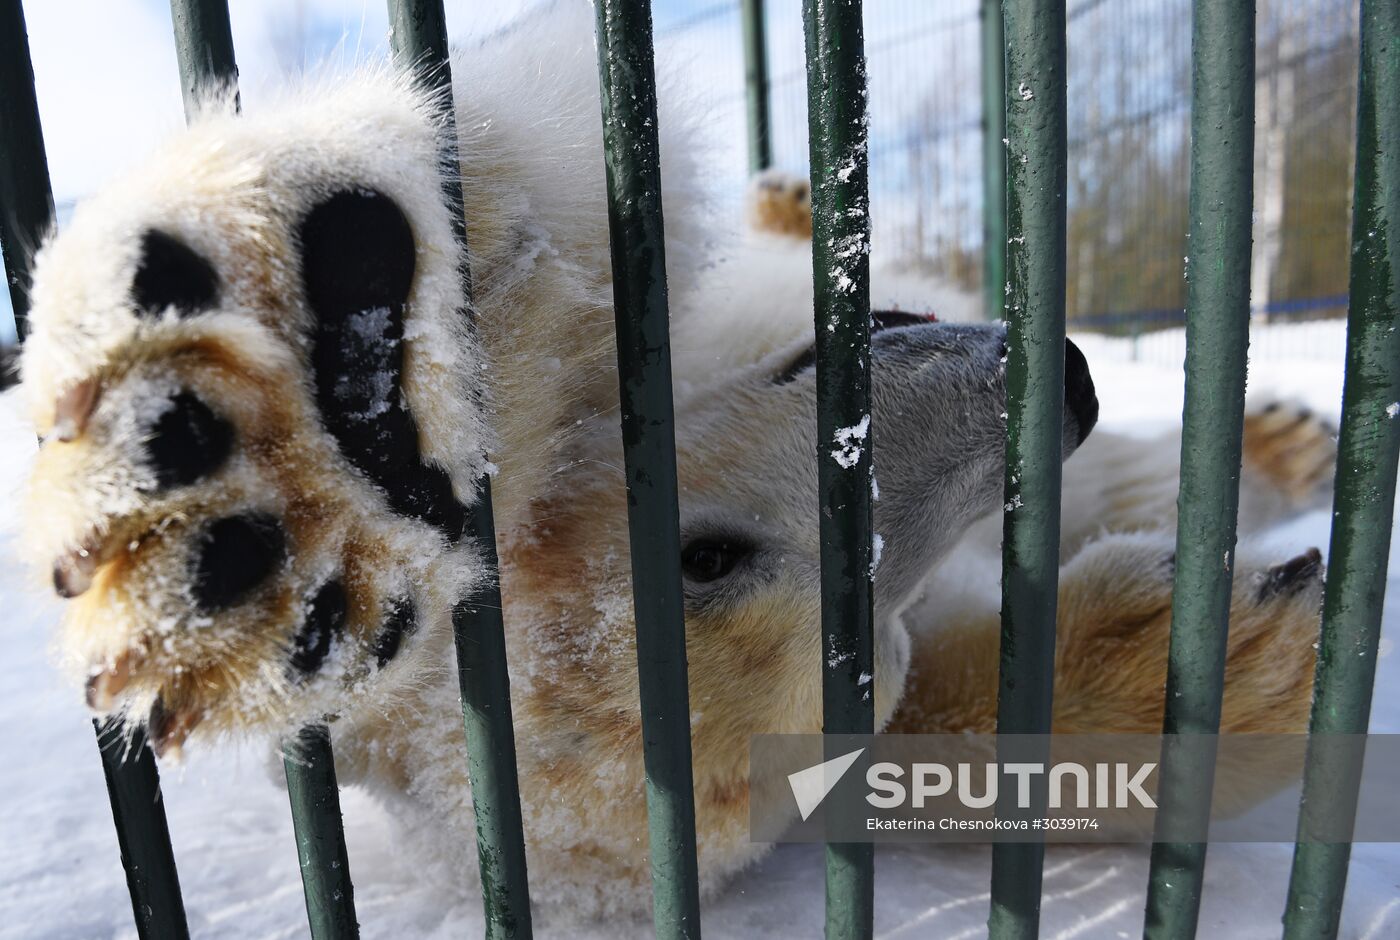 Moscow Zoo holds visiting tour